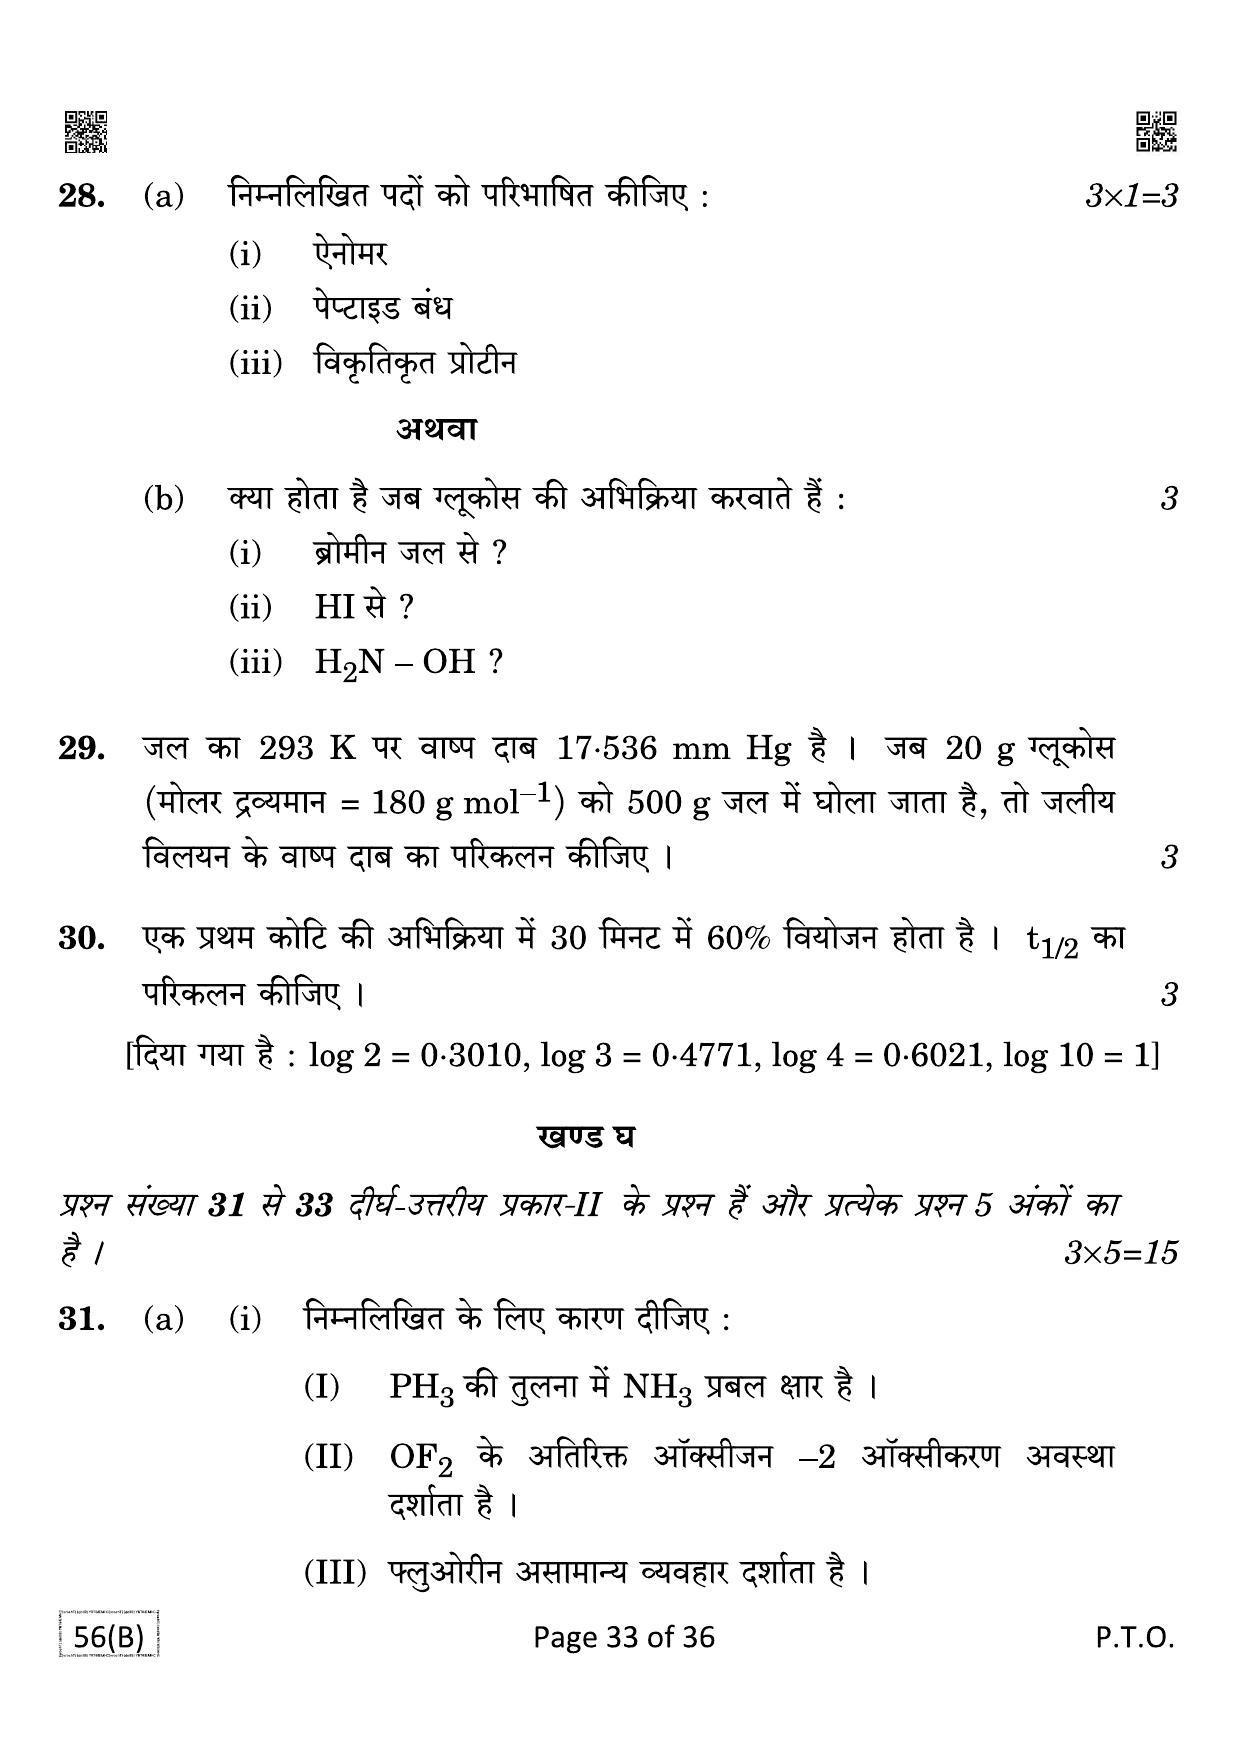 CBSE Class 12 QP_043_CHEMISTRY_FOR_BLIND_CANDIDATES 2021 Compartment Question Paper - Page 33